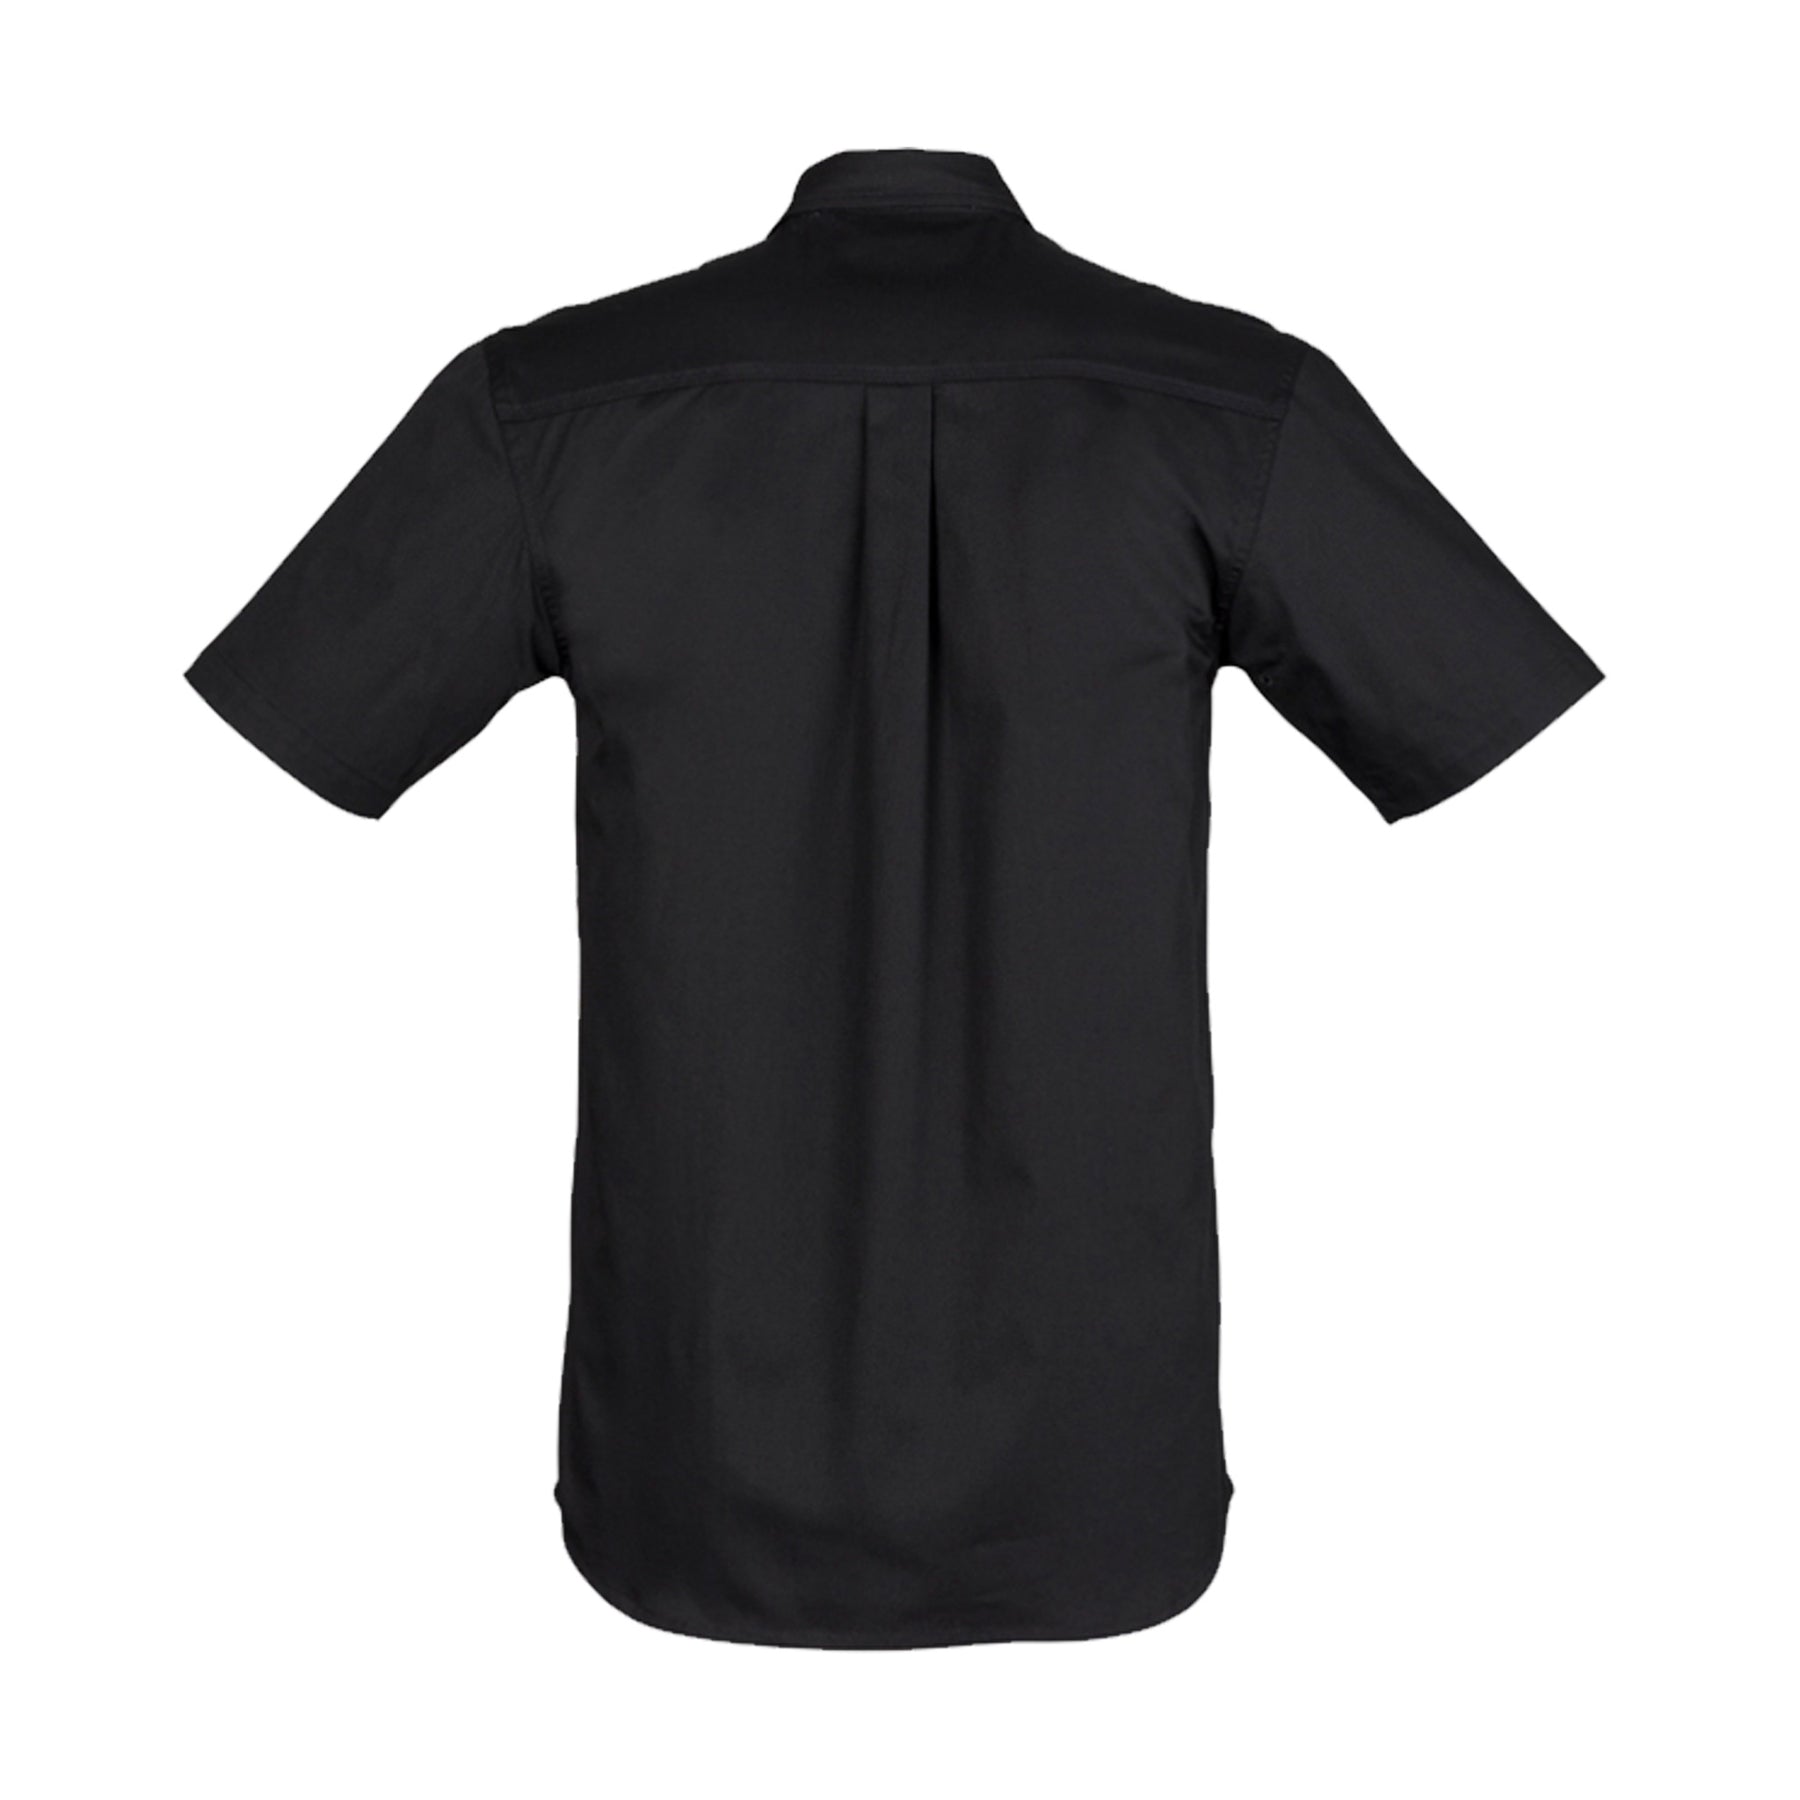 back of light weight short sleeve tradie shirt in black